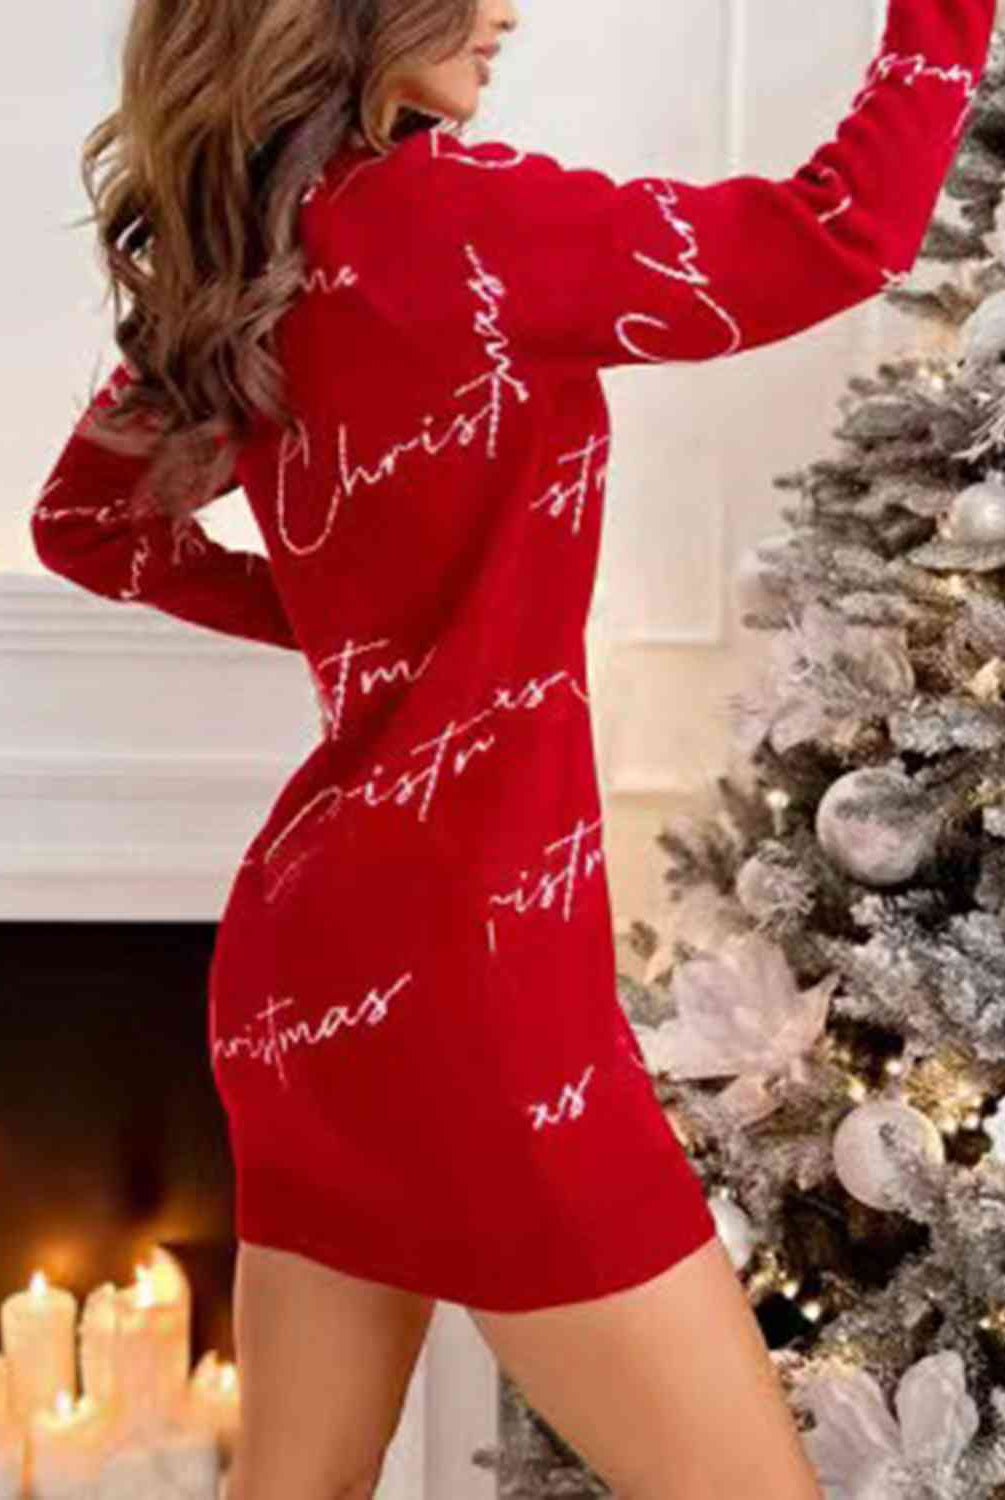 HRISTMAS Letter Print Tunic Sweater Dress - GemThreads Boutique